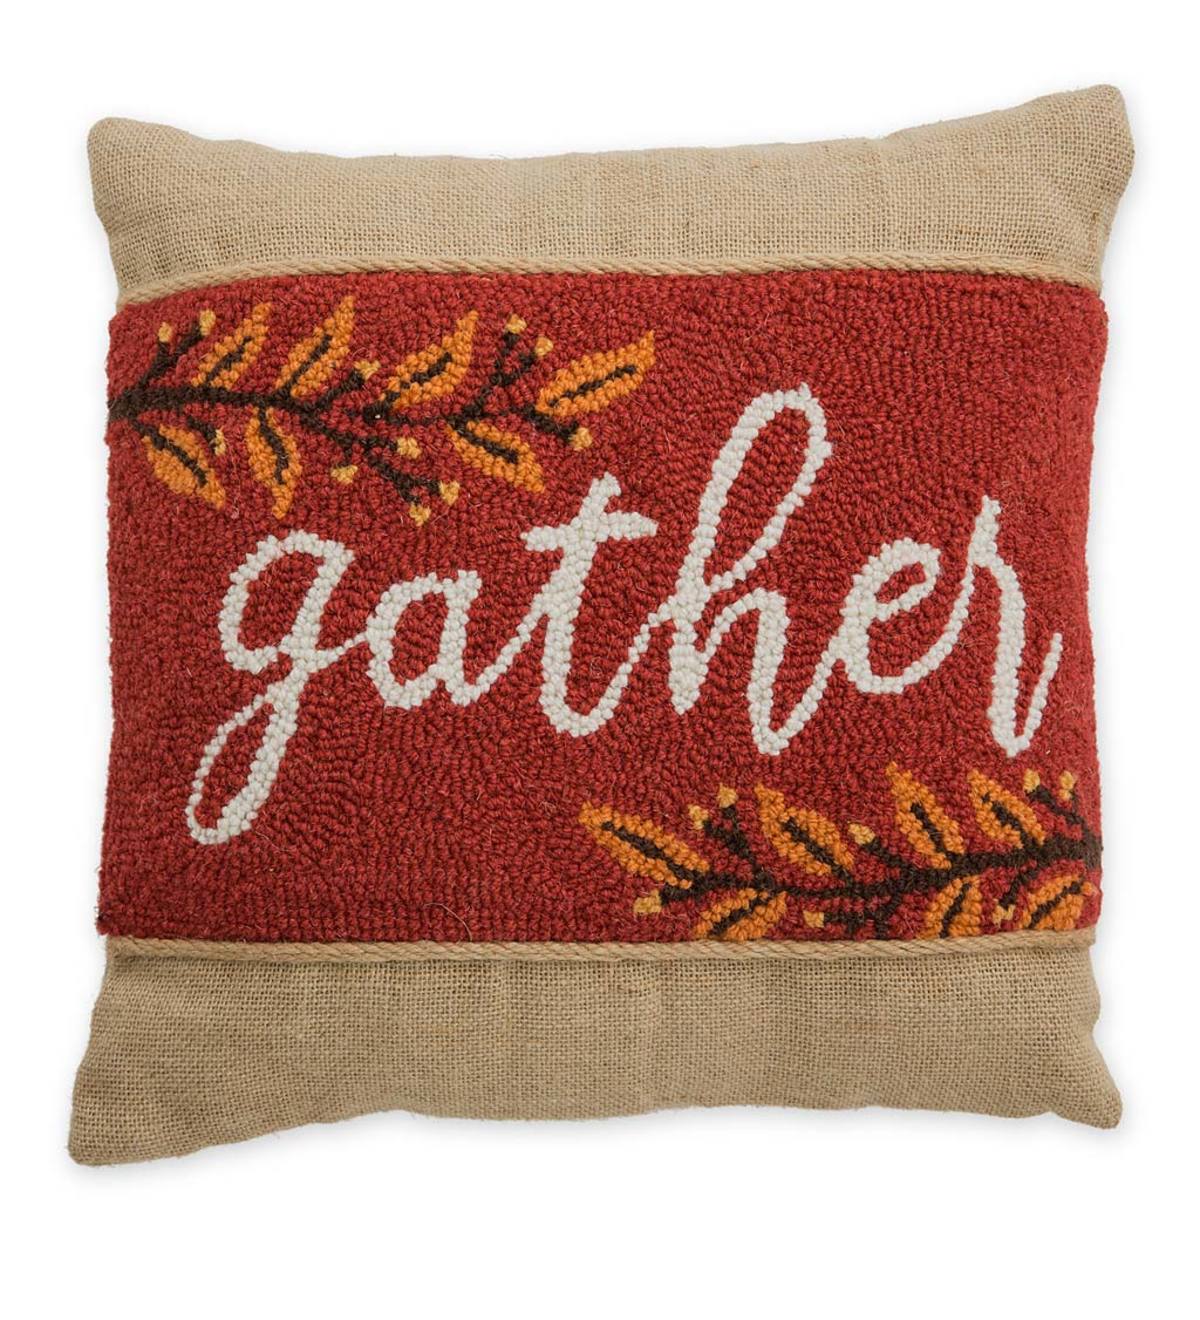 Hooked Wool and Burlap Gather Throw Pillow